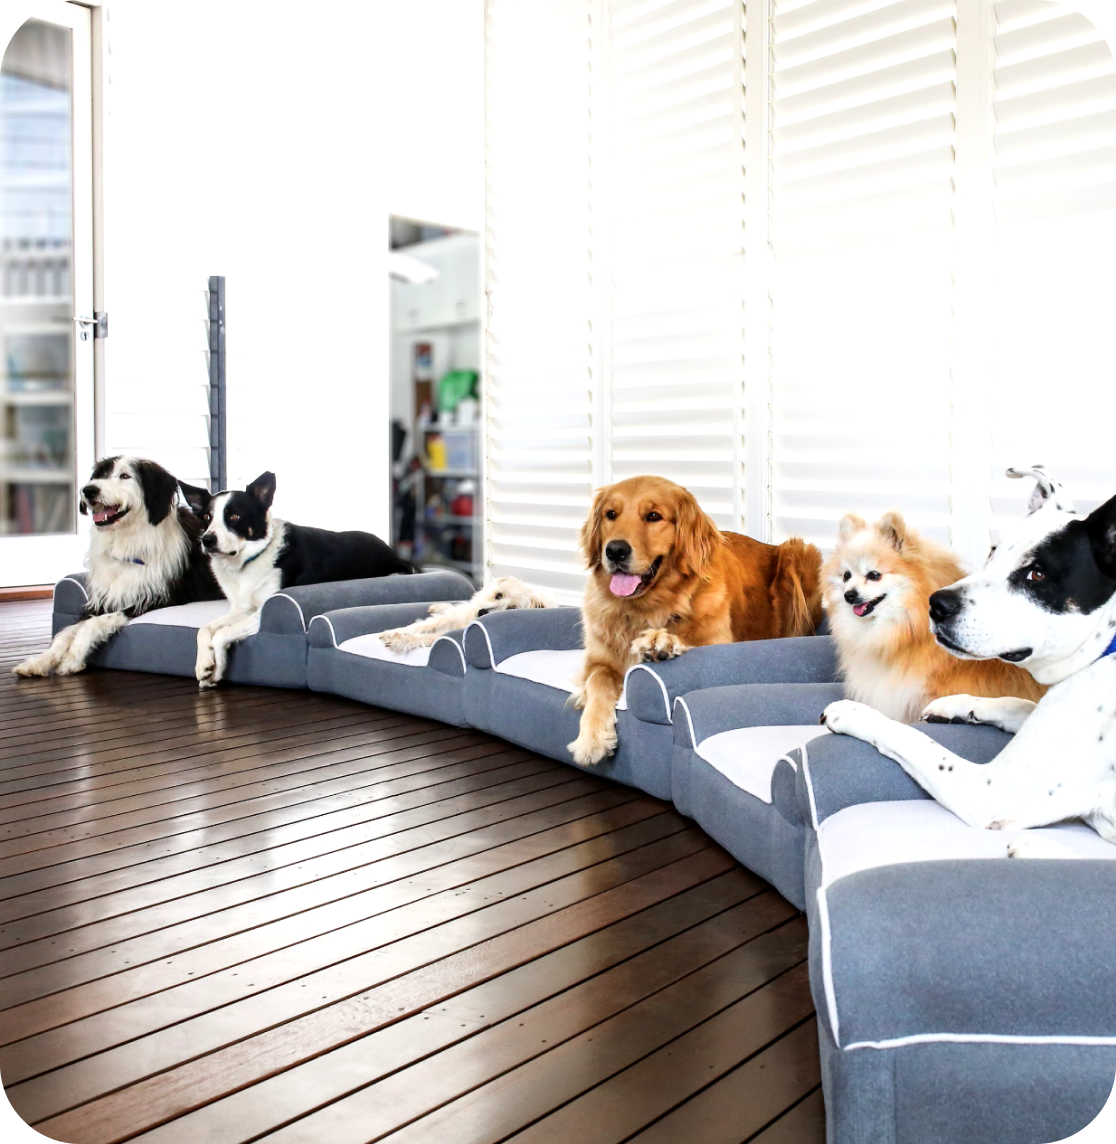 Dog Cloud - Advanced Vibration Therapy At-Home